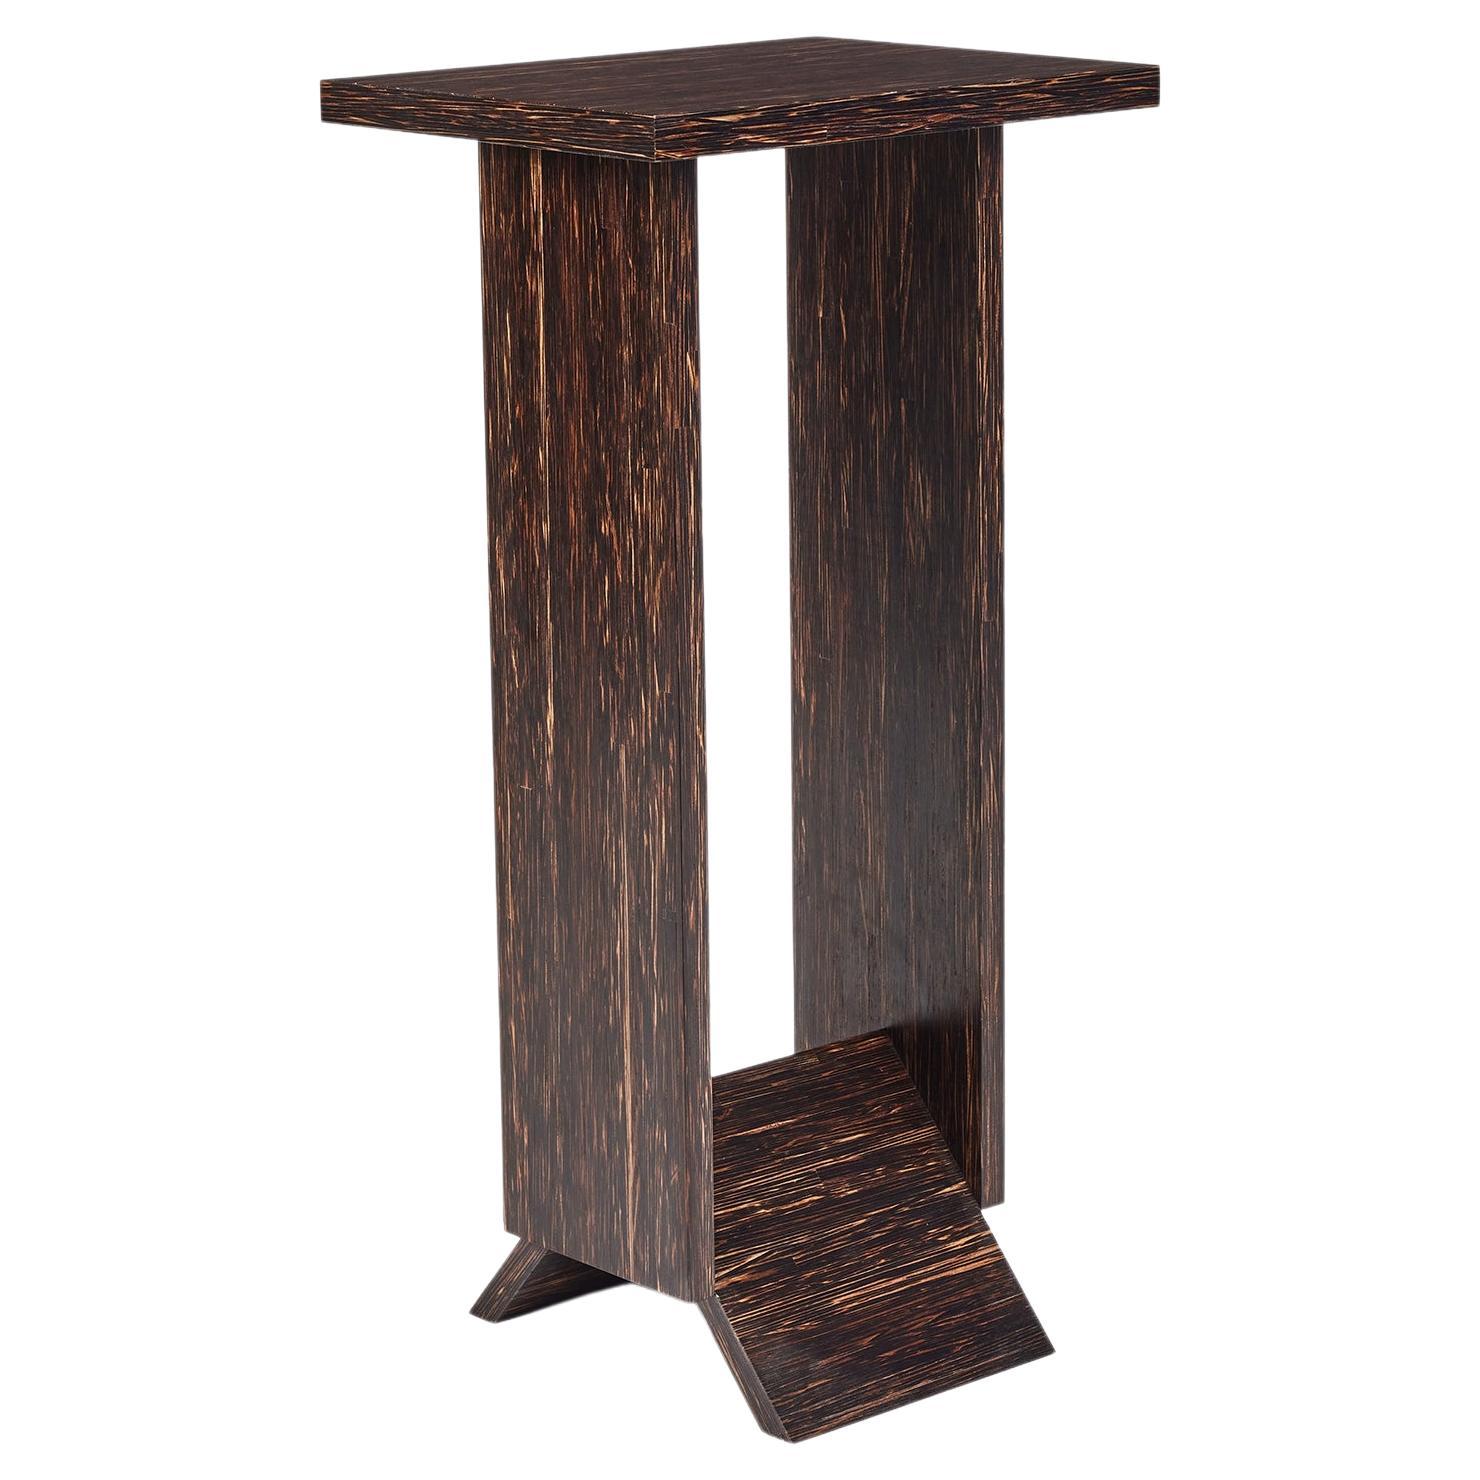 'Hotel de Tour' Wooden Pedestal Table in the Manner of Pierre Chareau For Sale